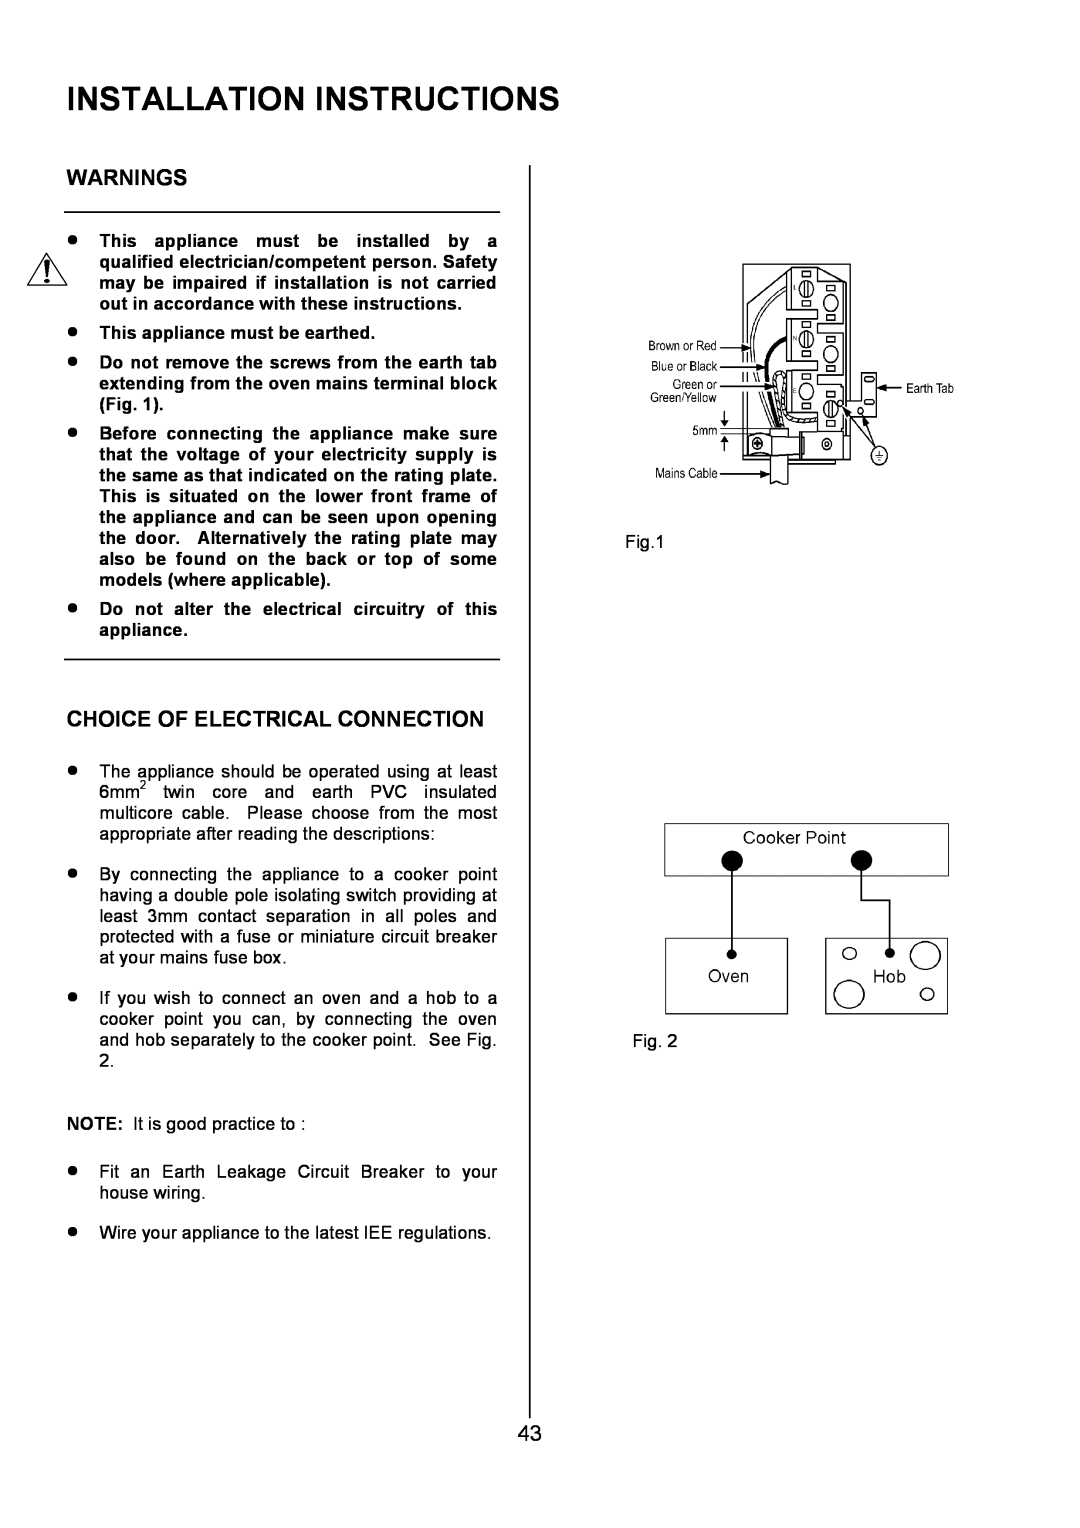 Electrolux U7101-4 Installation Instructions, Warnings, Choice Of Electrical Connection, This appliance must be earthed 